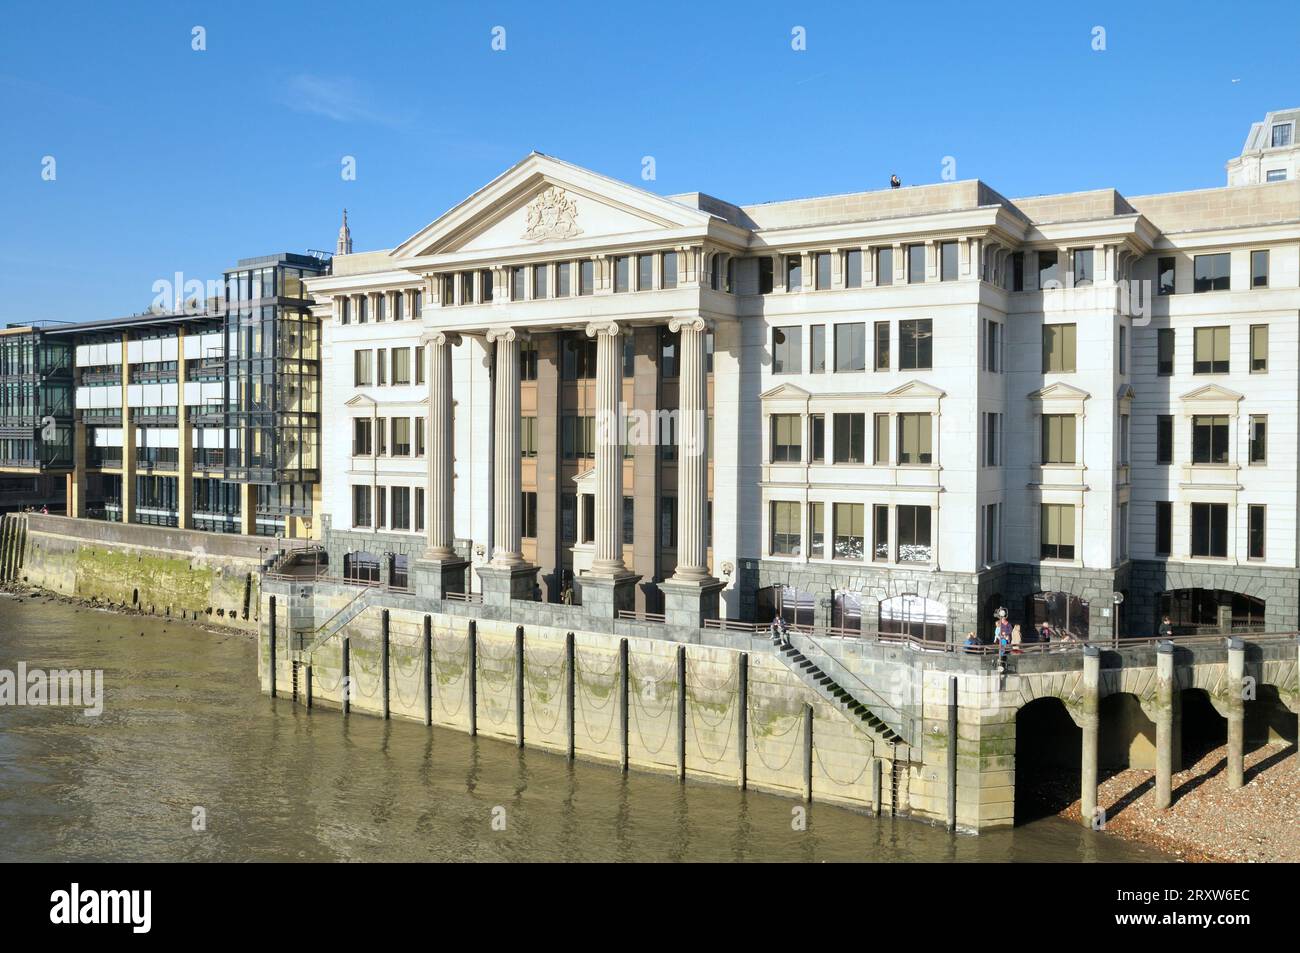 Vintners Place sul fiume Tamigi, Upper Thames Street, Queenhithe, Londra, Inghilterra, REGNO UNITO Foto Stock